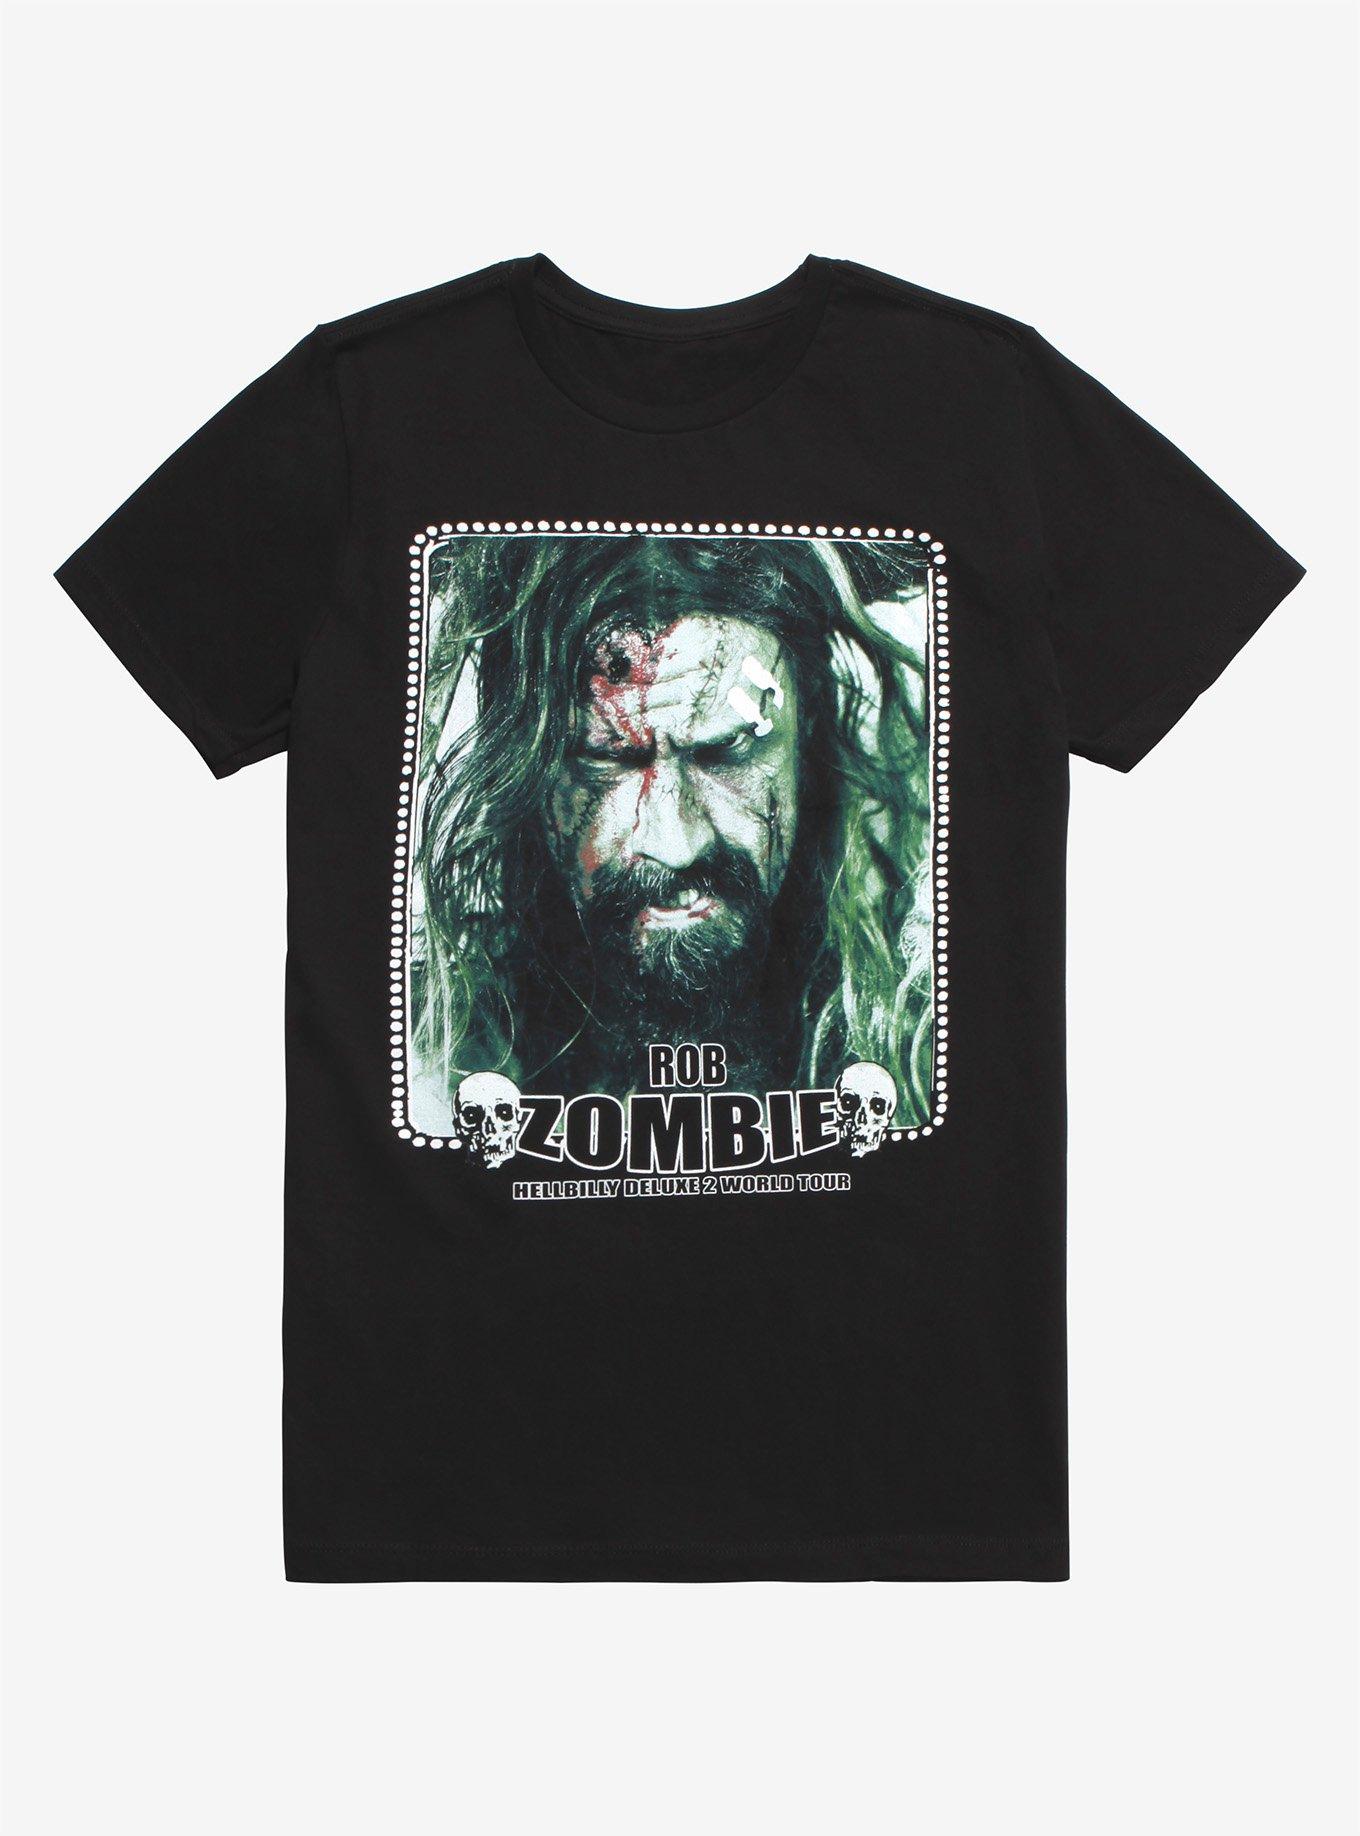 Rob Zombie Hellbilly Deluxe 2 World Tour T-Shirt, BLACK, hi-res